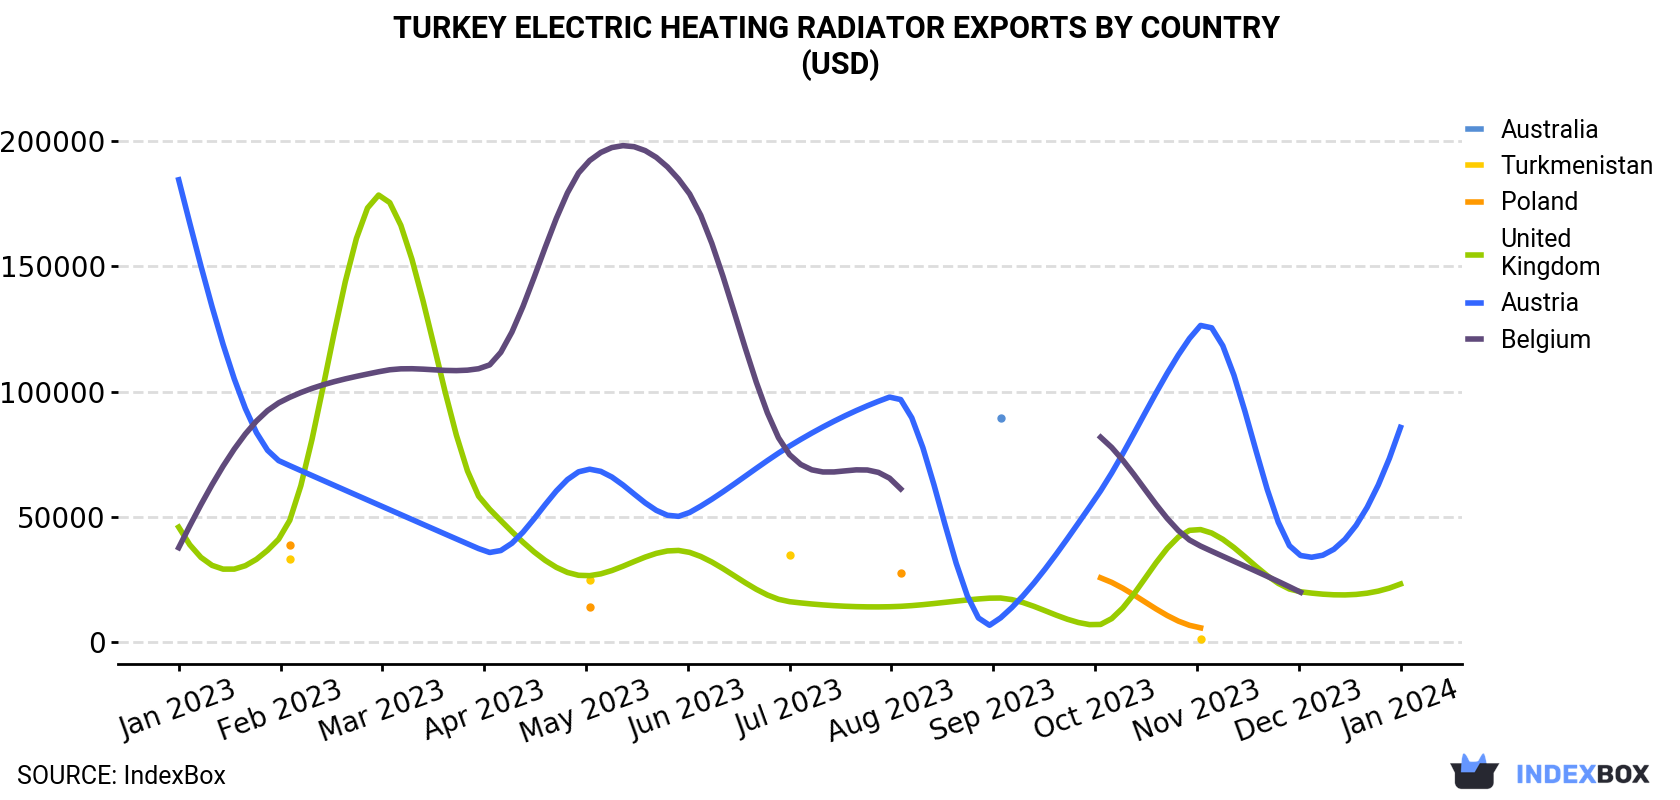 Turkey Electric Heating Radiator Exports By Country (USD)